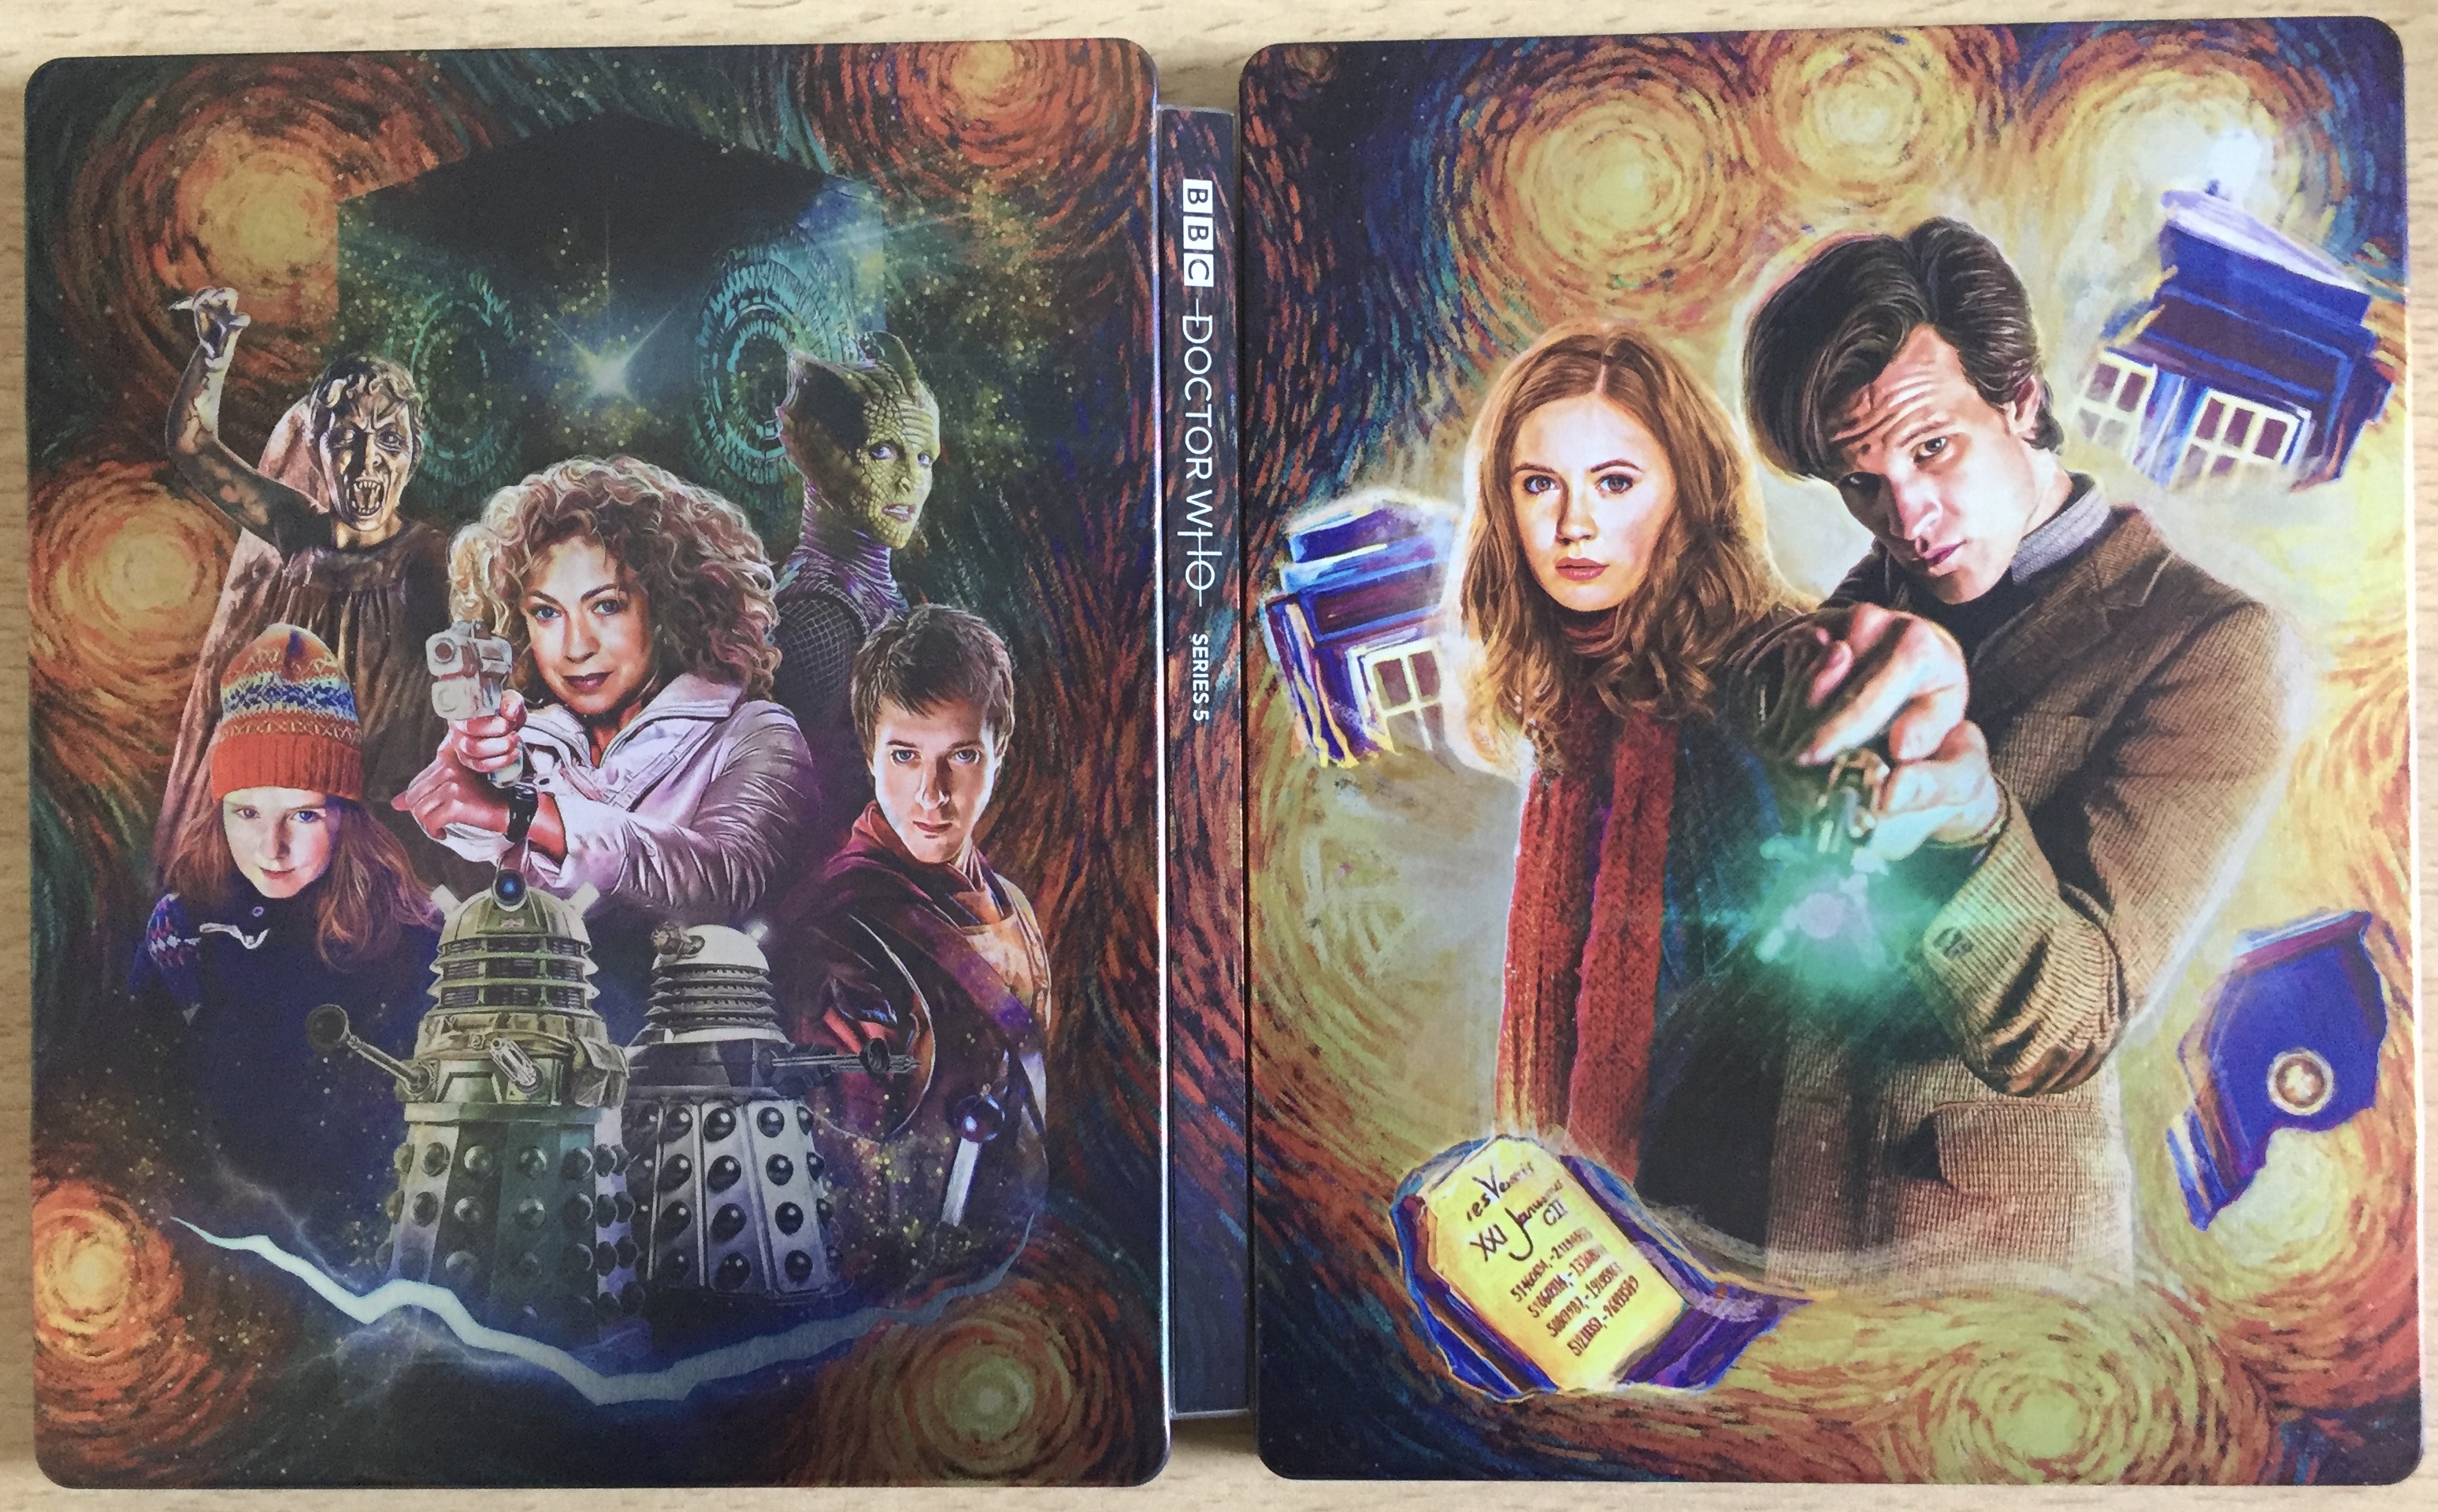 The unfolded cover of the Doctor Who Series 5 Blu-Ray Steelbook. The painted artwork shows The Doctor and Amy Pond on the right, with partial images of the Tardis swirling around them, while on the left is a selection of other characters, including Rory, River Song, young Amy and the Daleks.